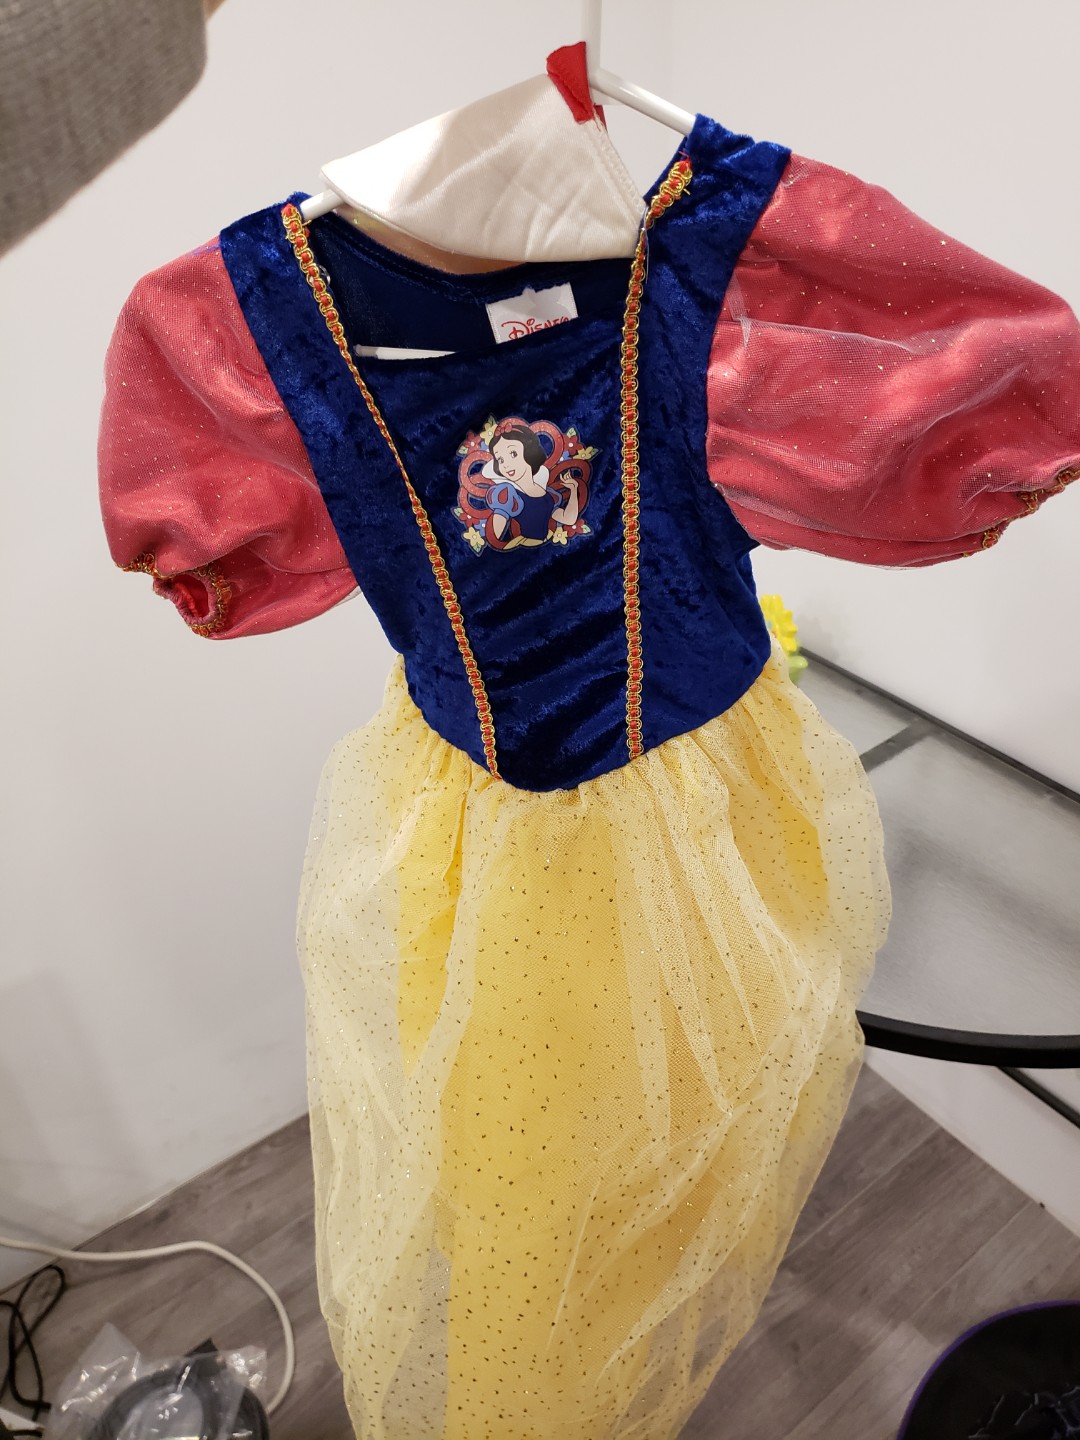 Snow white halloween dress and accessories